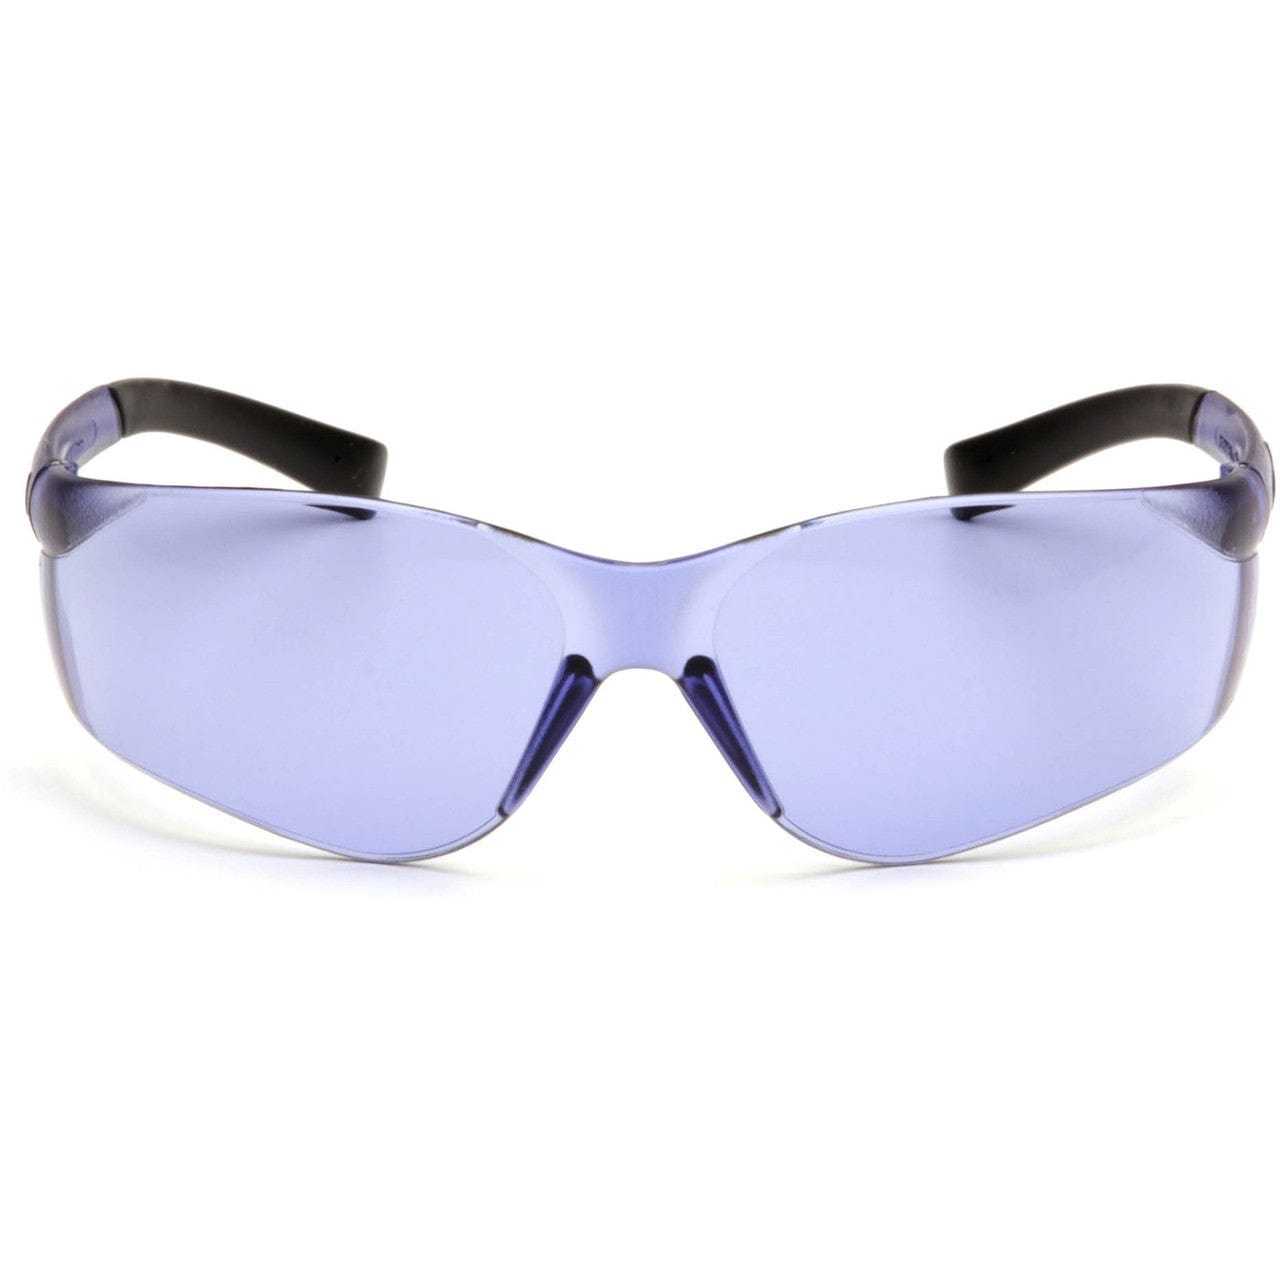 Pyramex Ztek Safety Glasses with Purple Haze Lens S2565S Front View